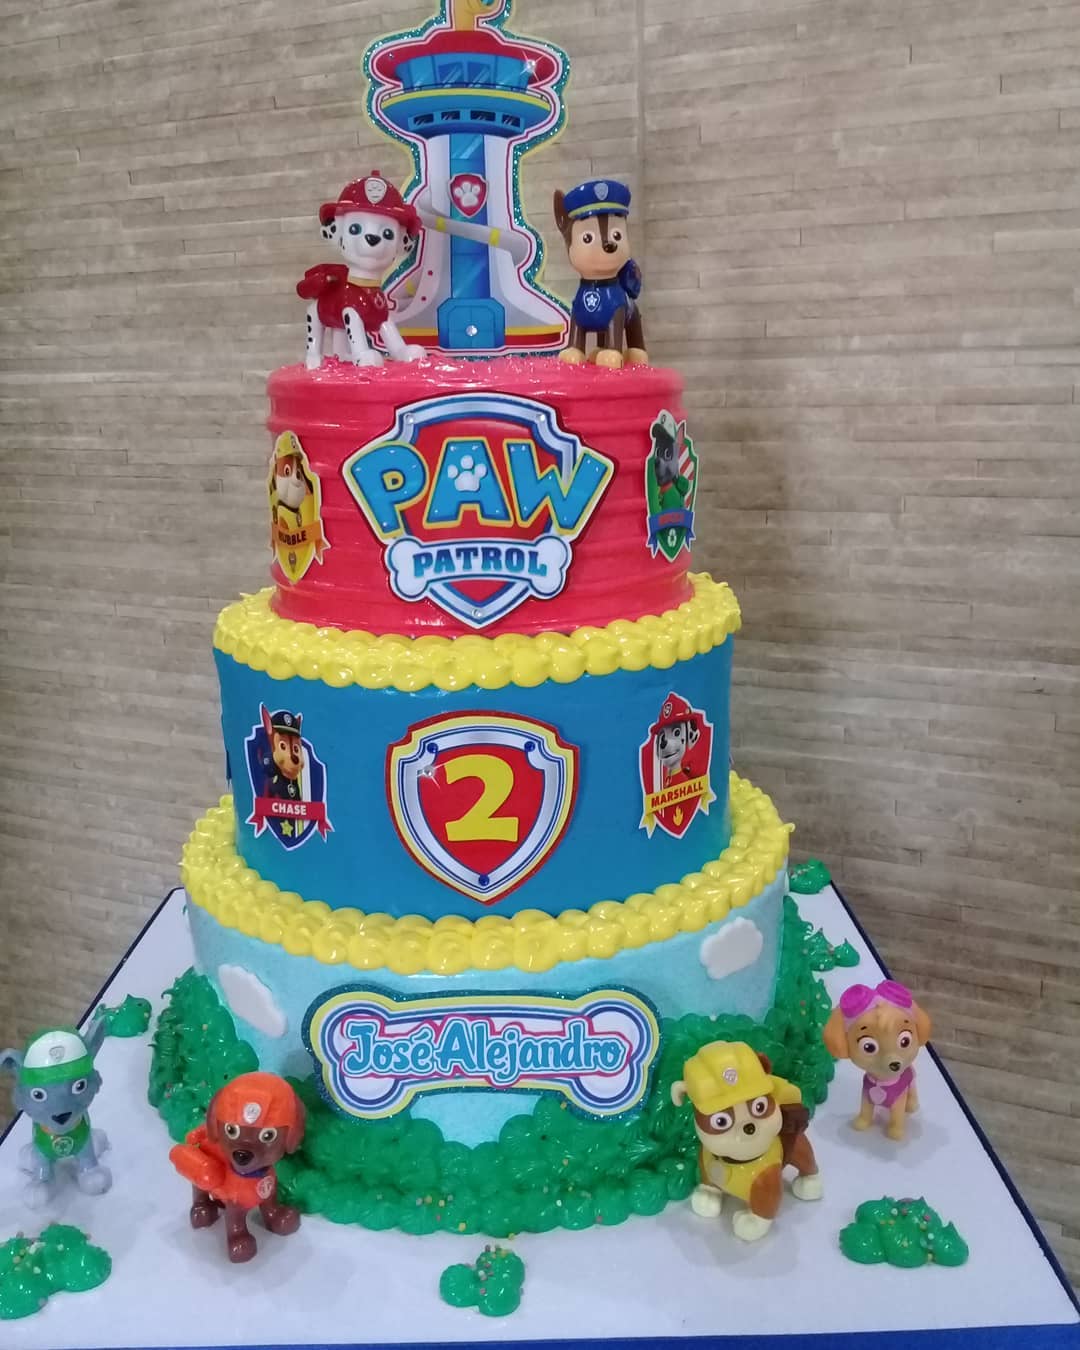 15-paw-patrol-cake-ideas-for-girls-boys-that-are-super-cool